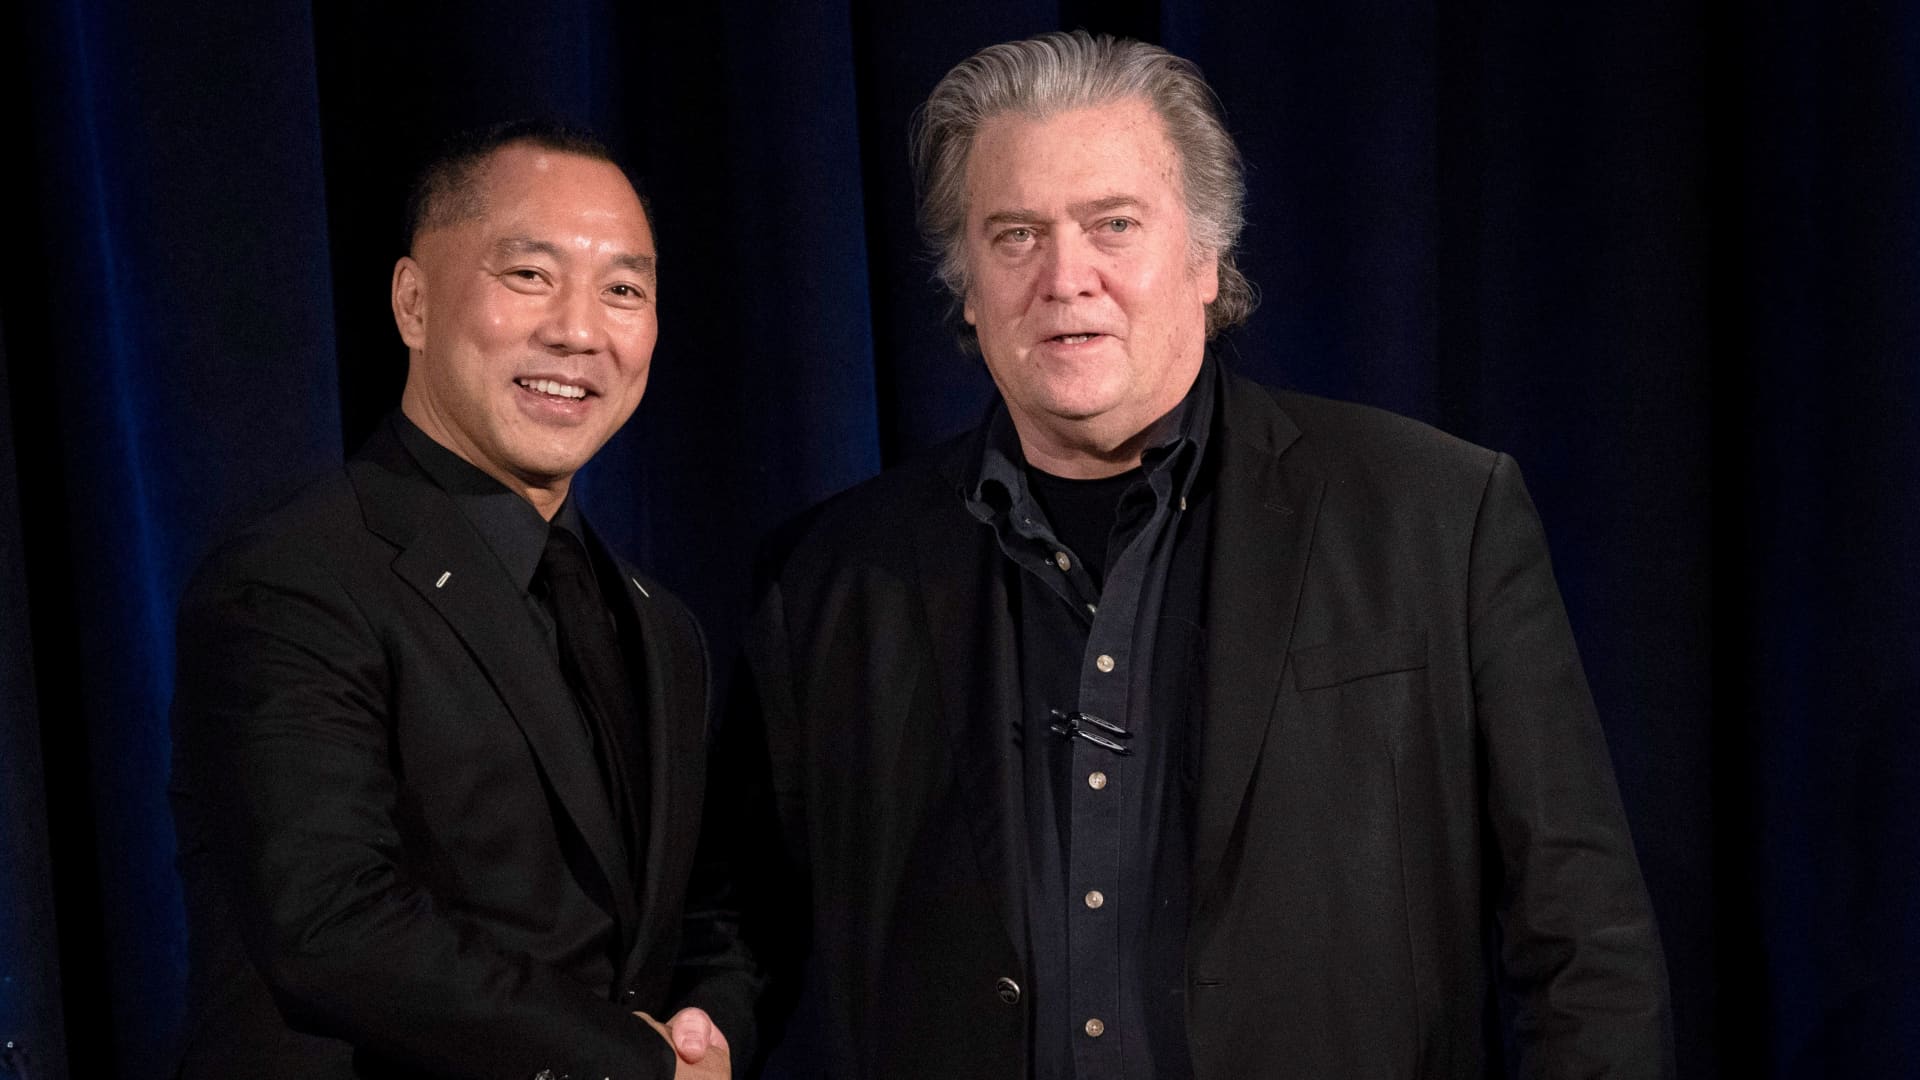 DOJ charges Chinese businessman Guo Wengui, associate of Steve Bannon, in  billion fraud